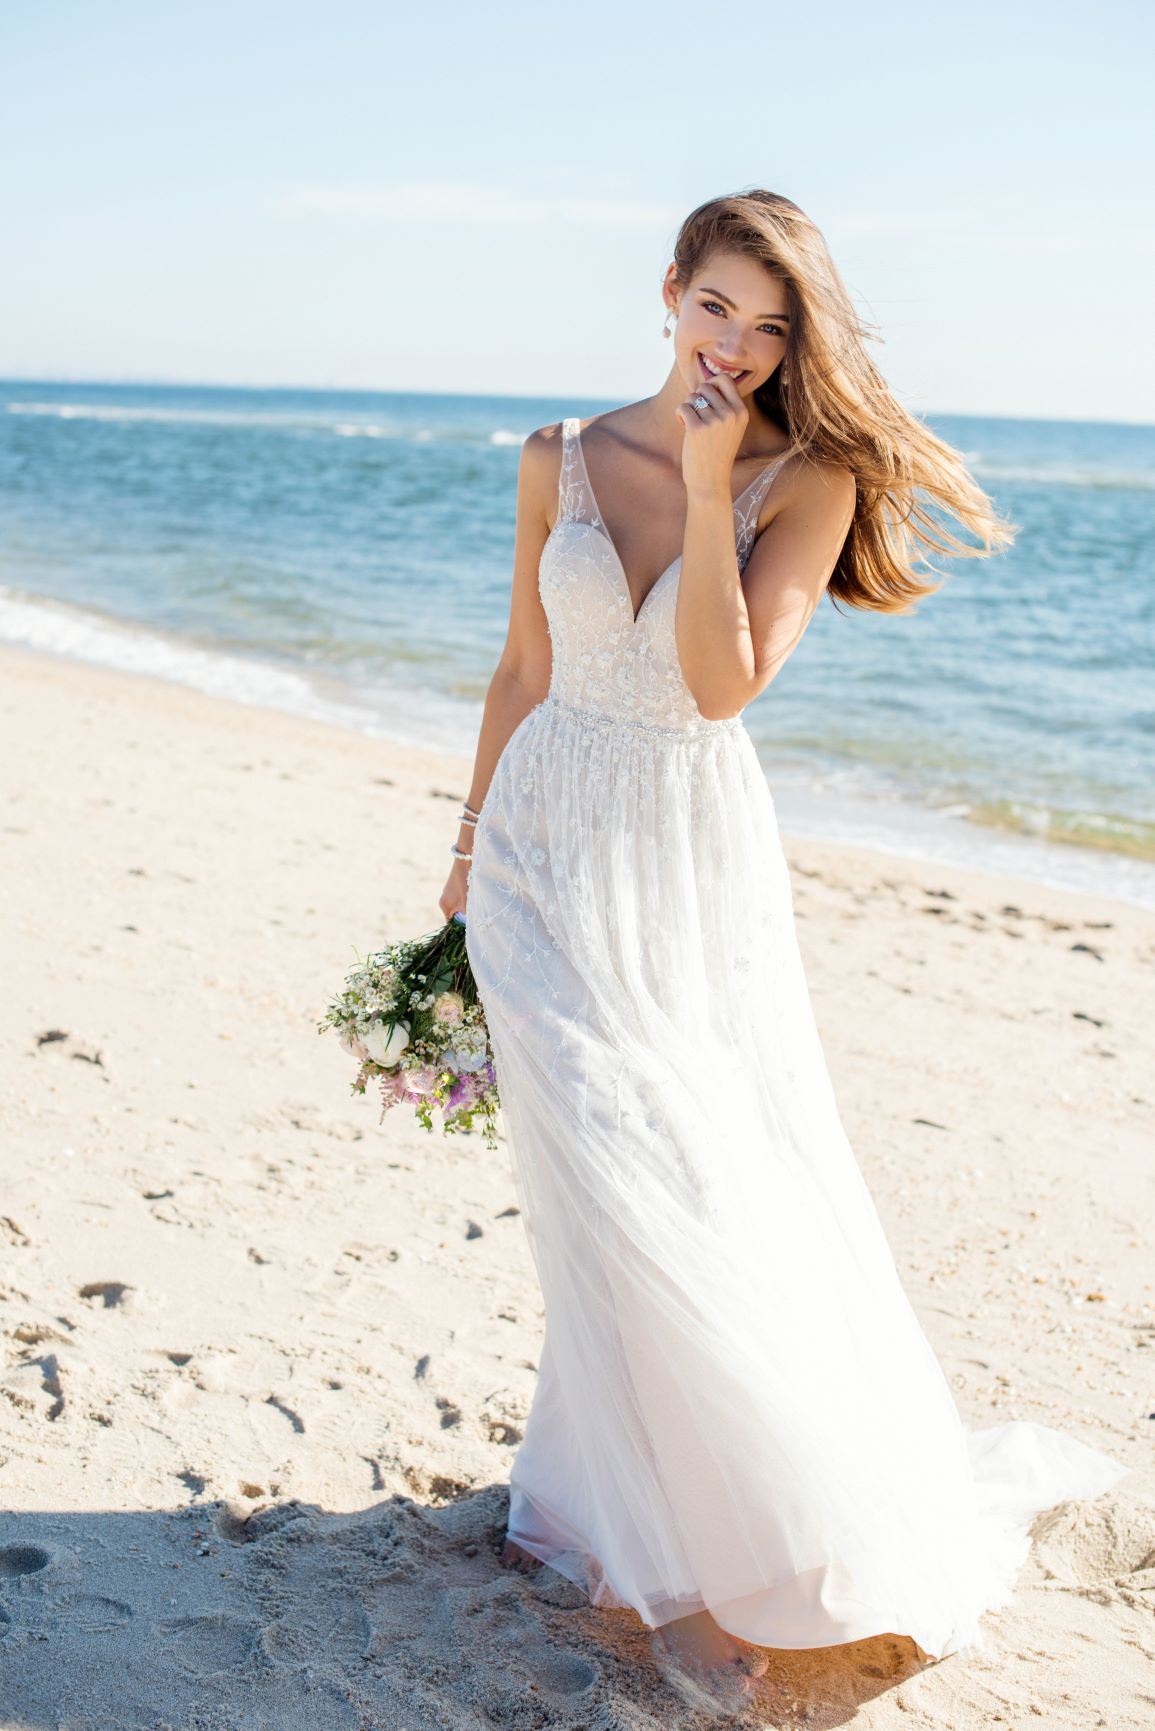 Brunette bride smiling at the beach